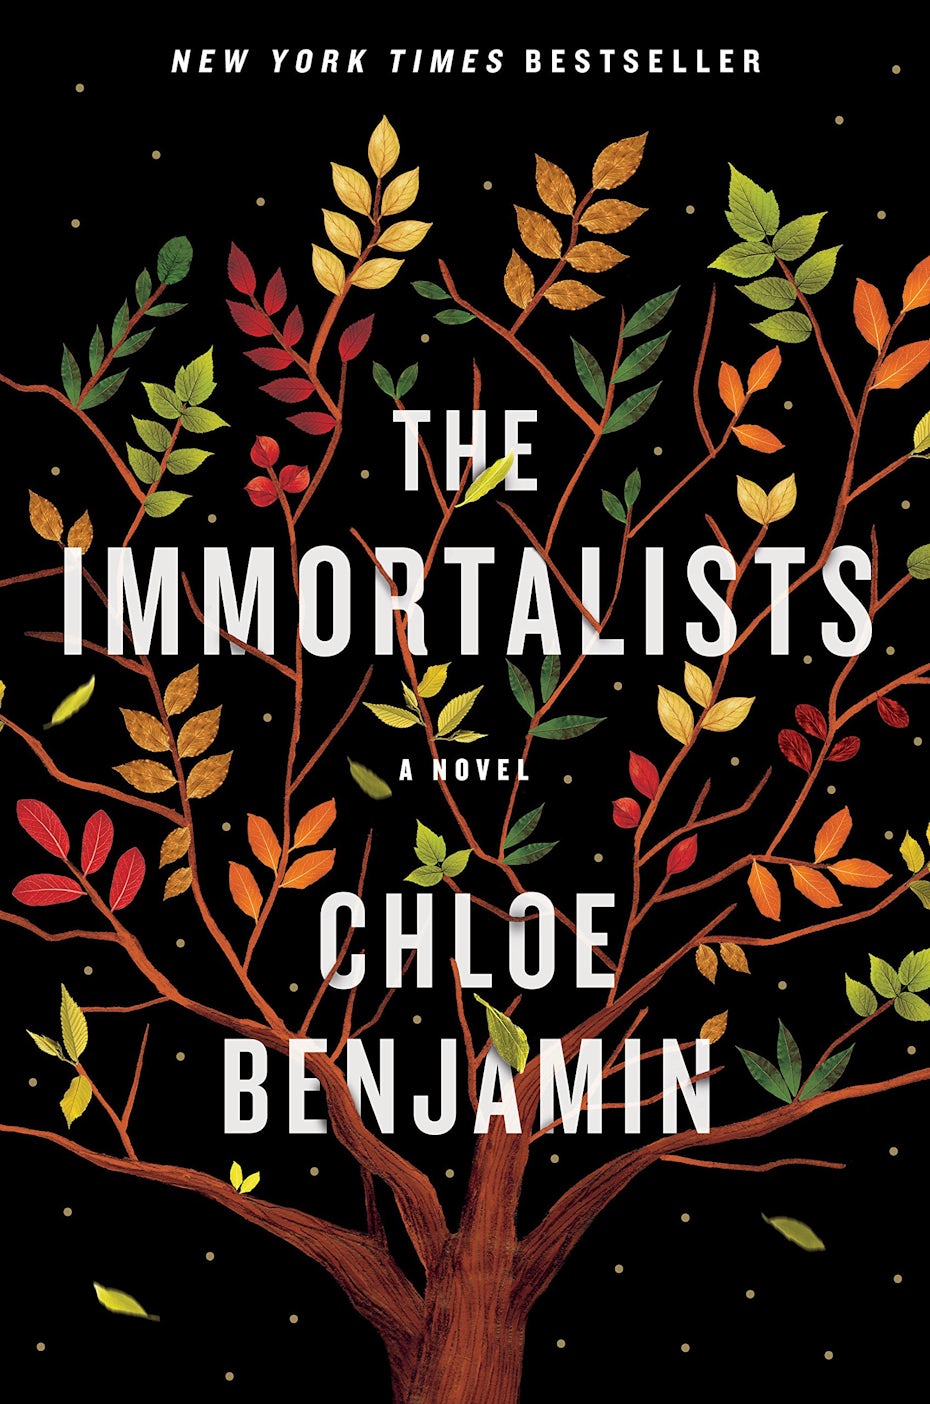 The immortalists book cover